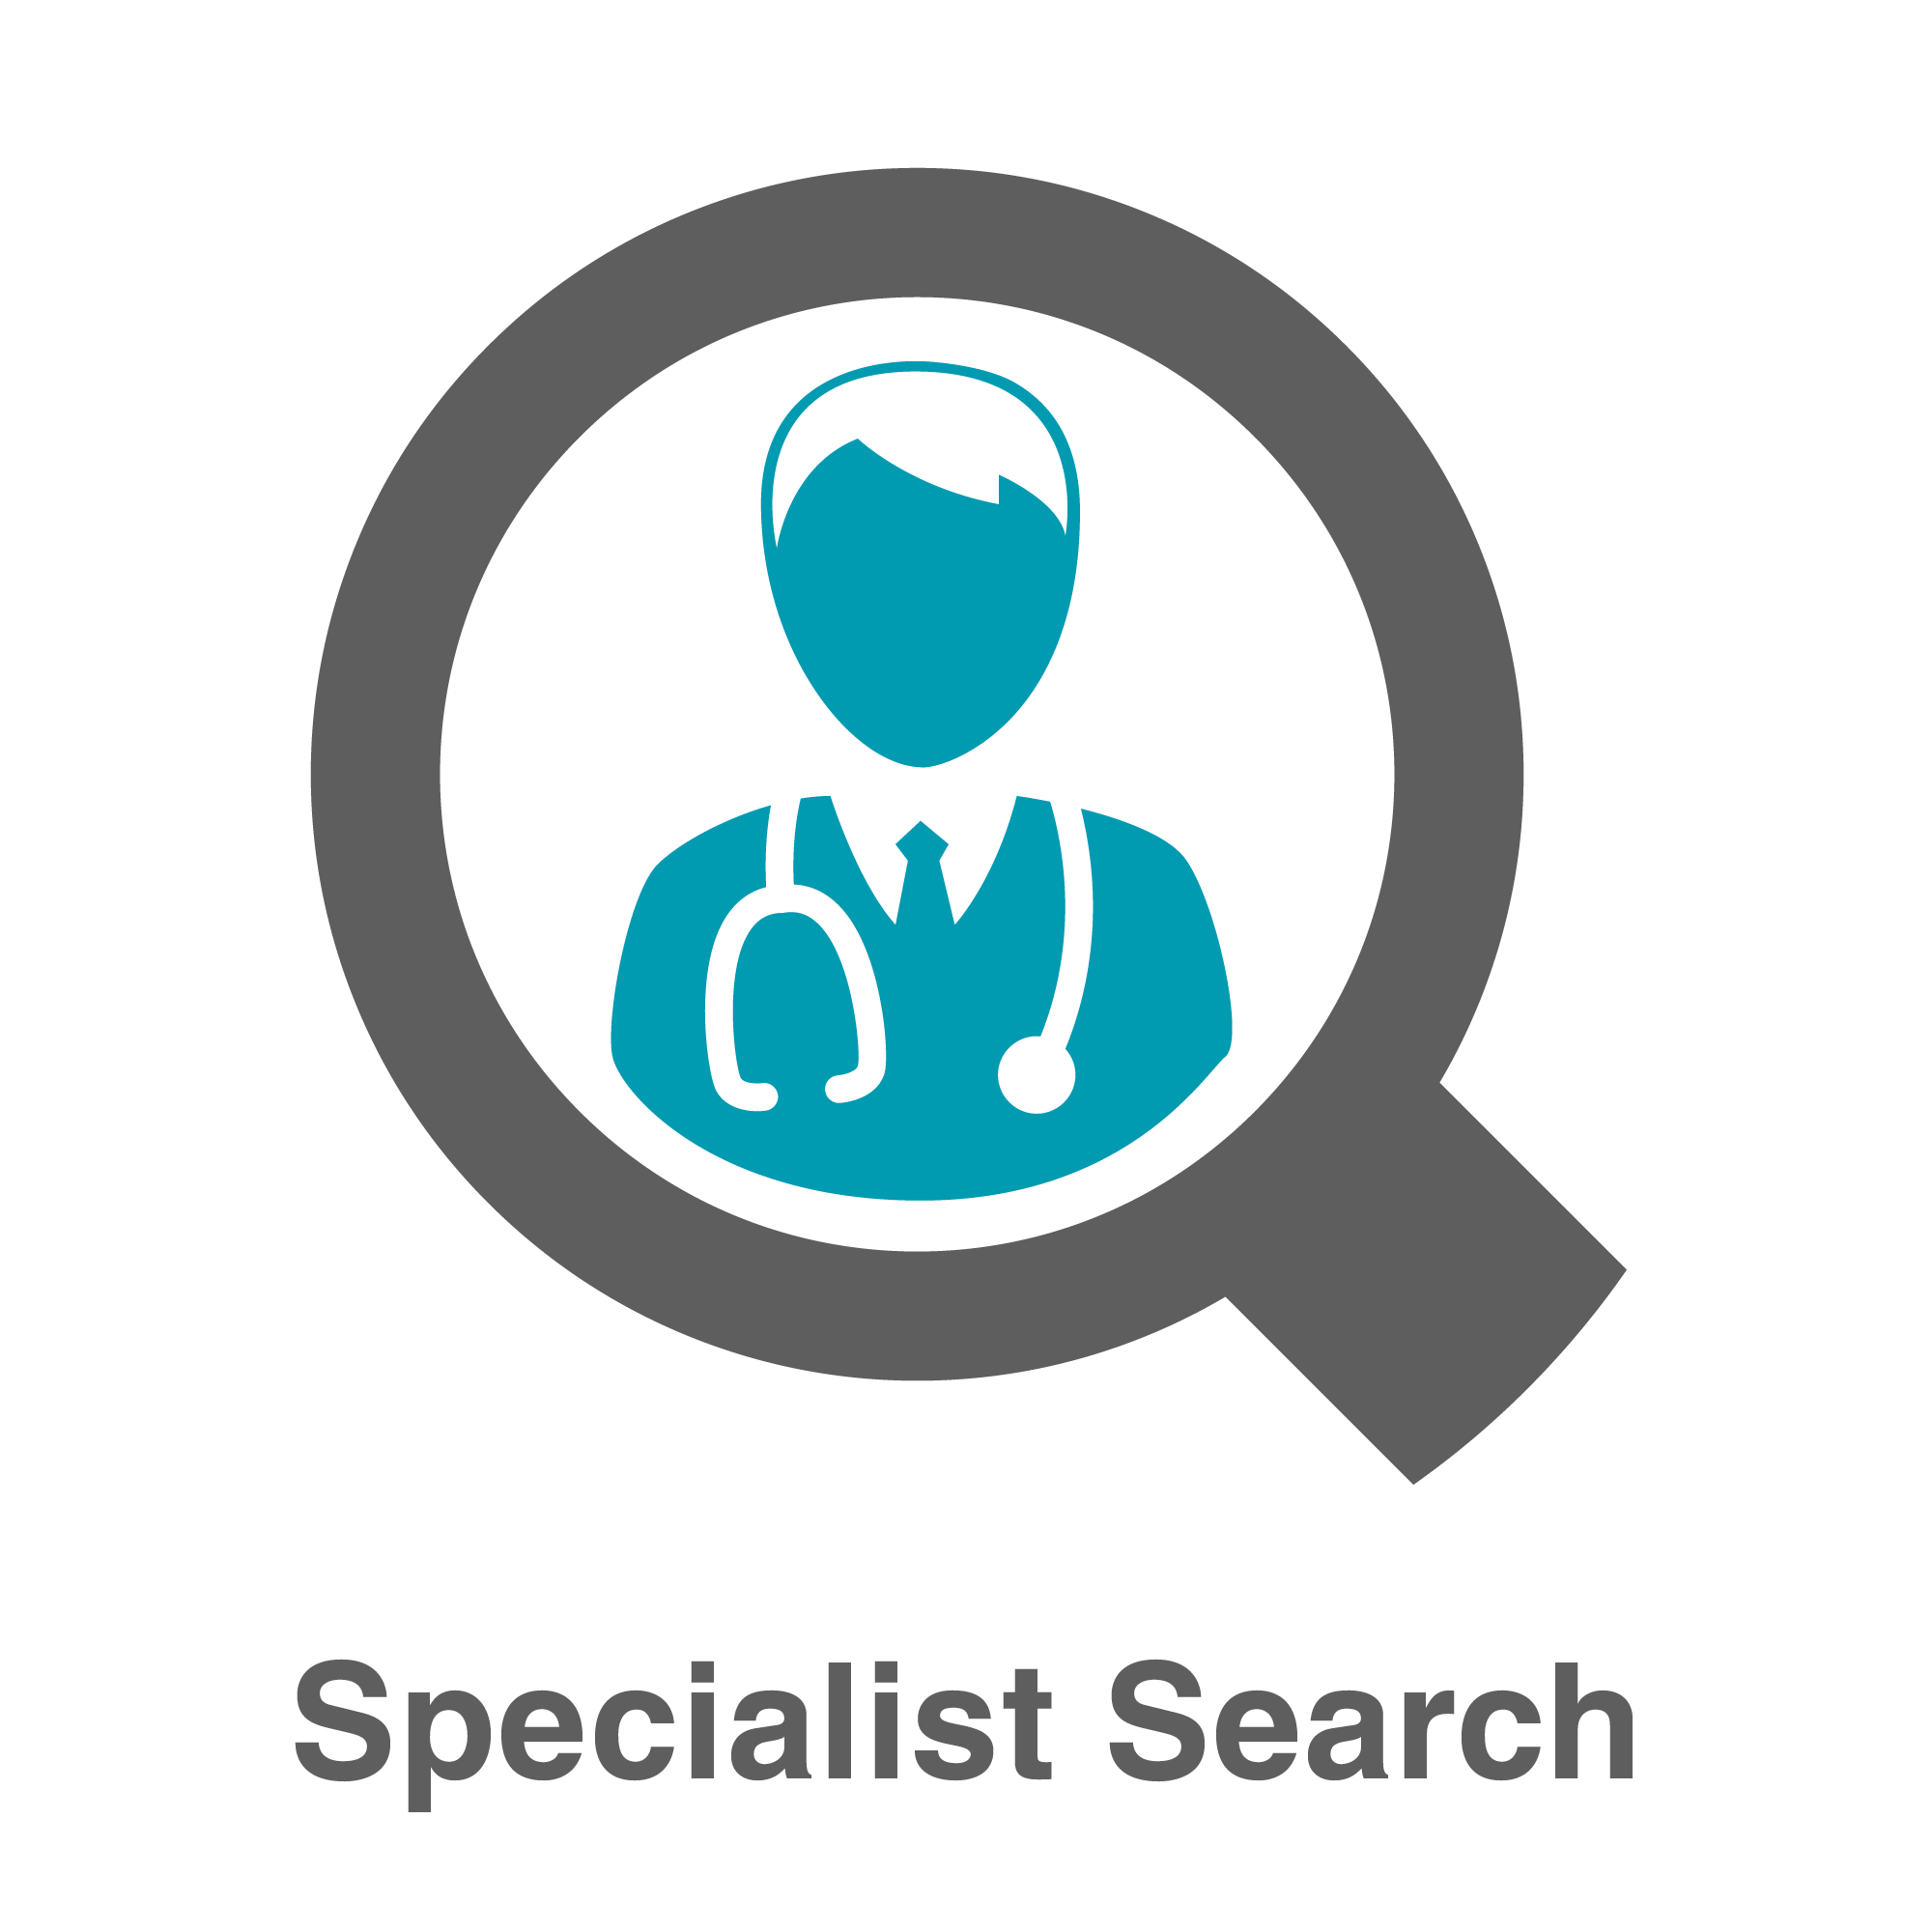 Specialist Search